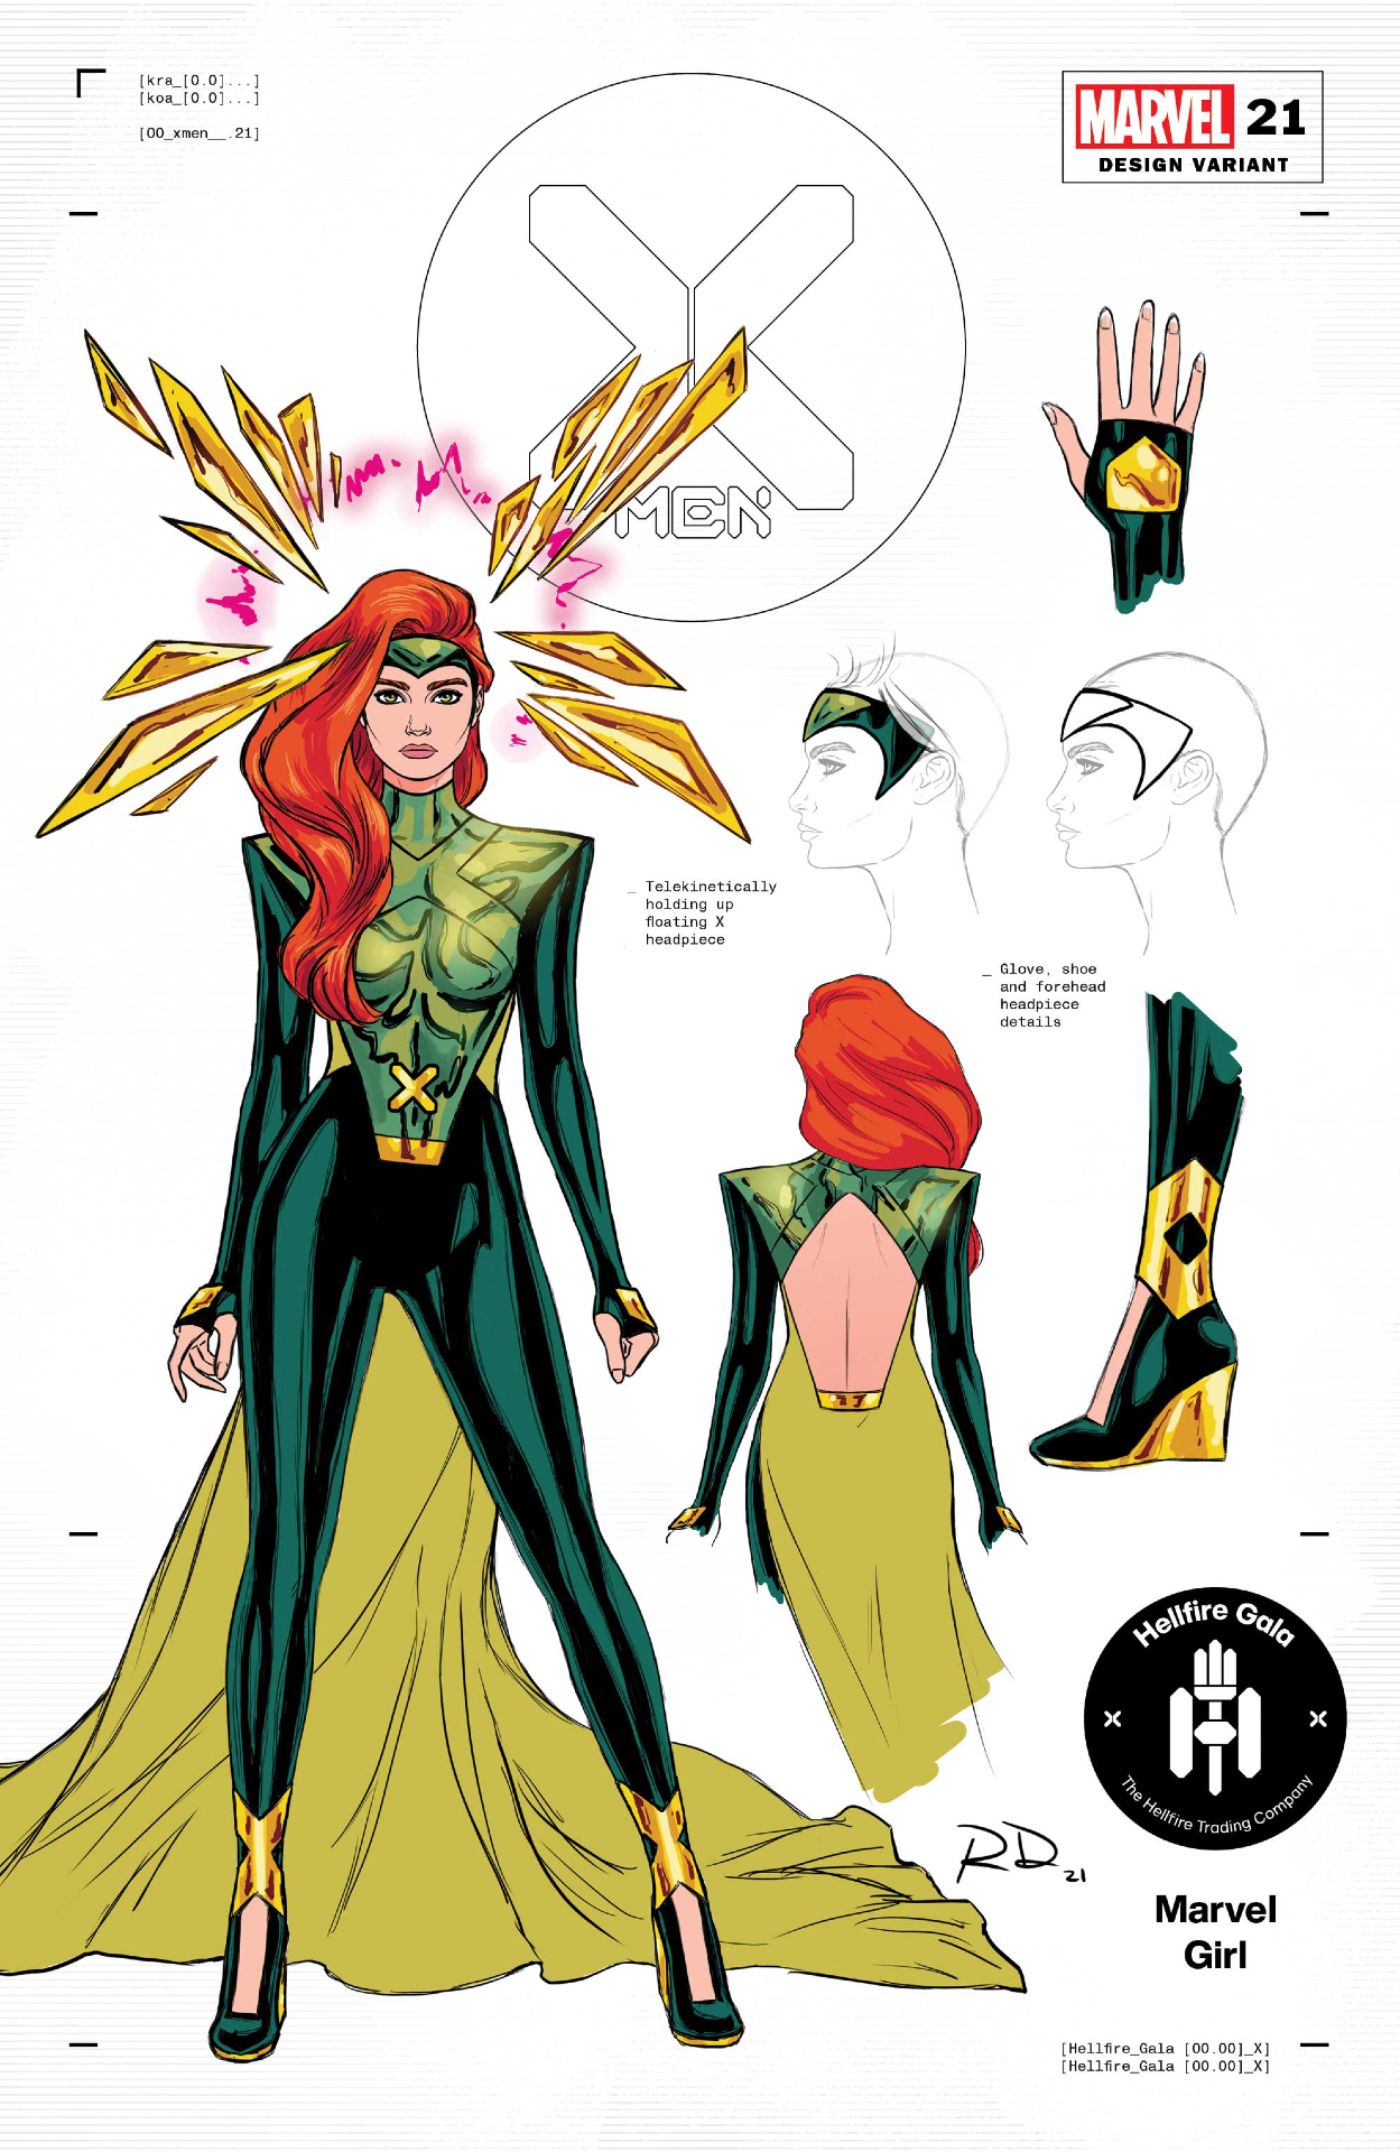 X-Men Get Stunning New Costumes To Launch Their New Team in Style